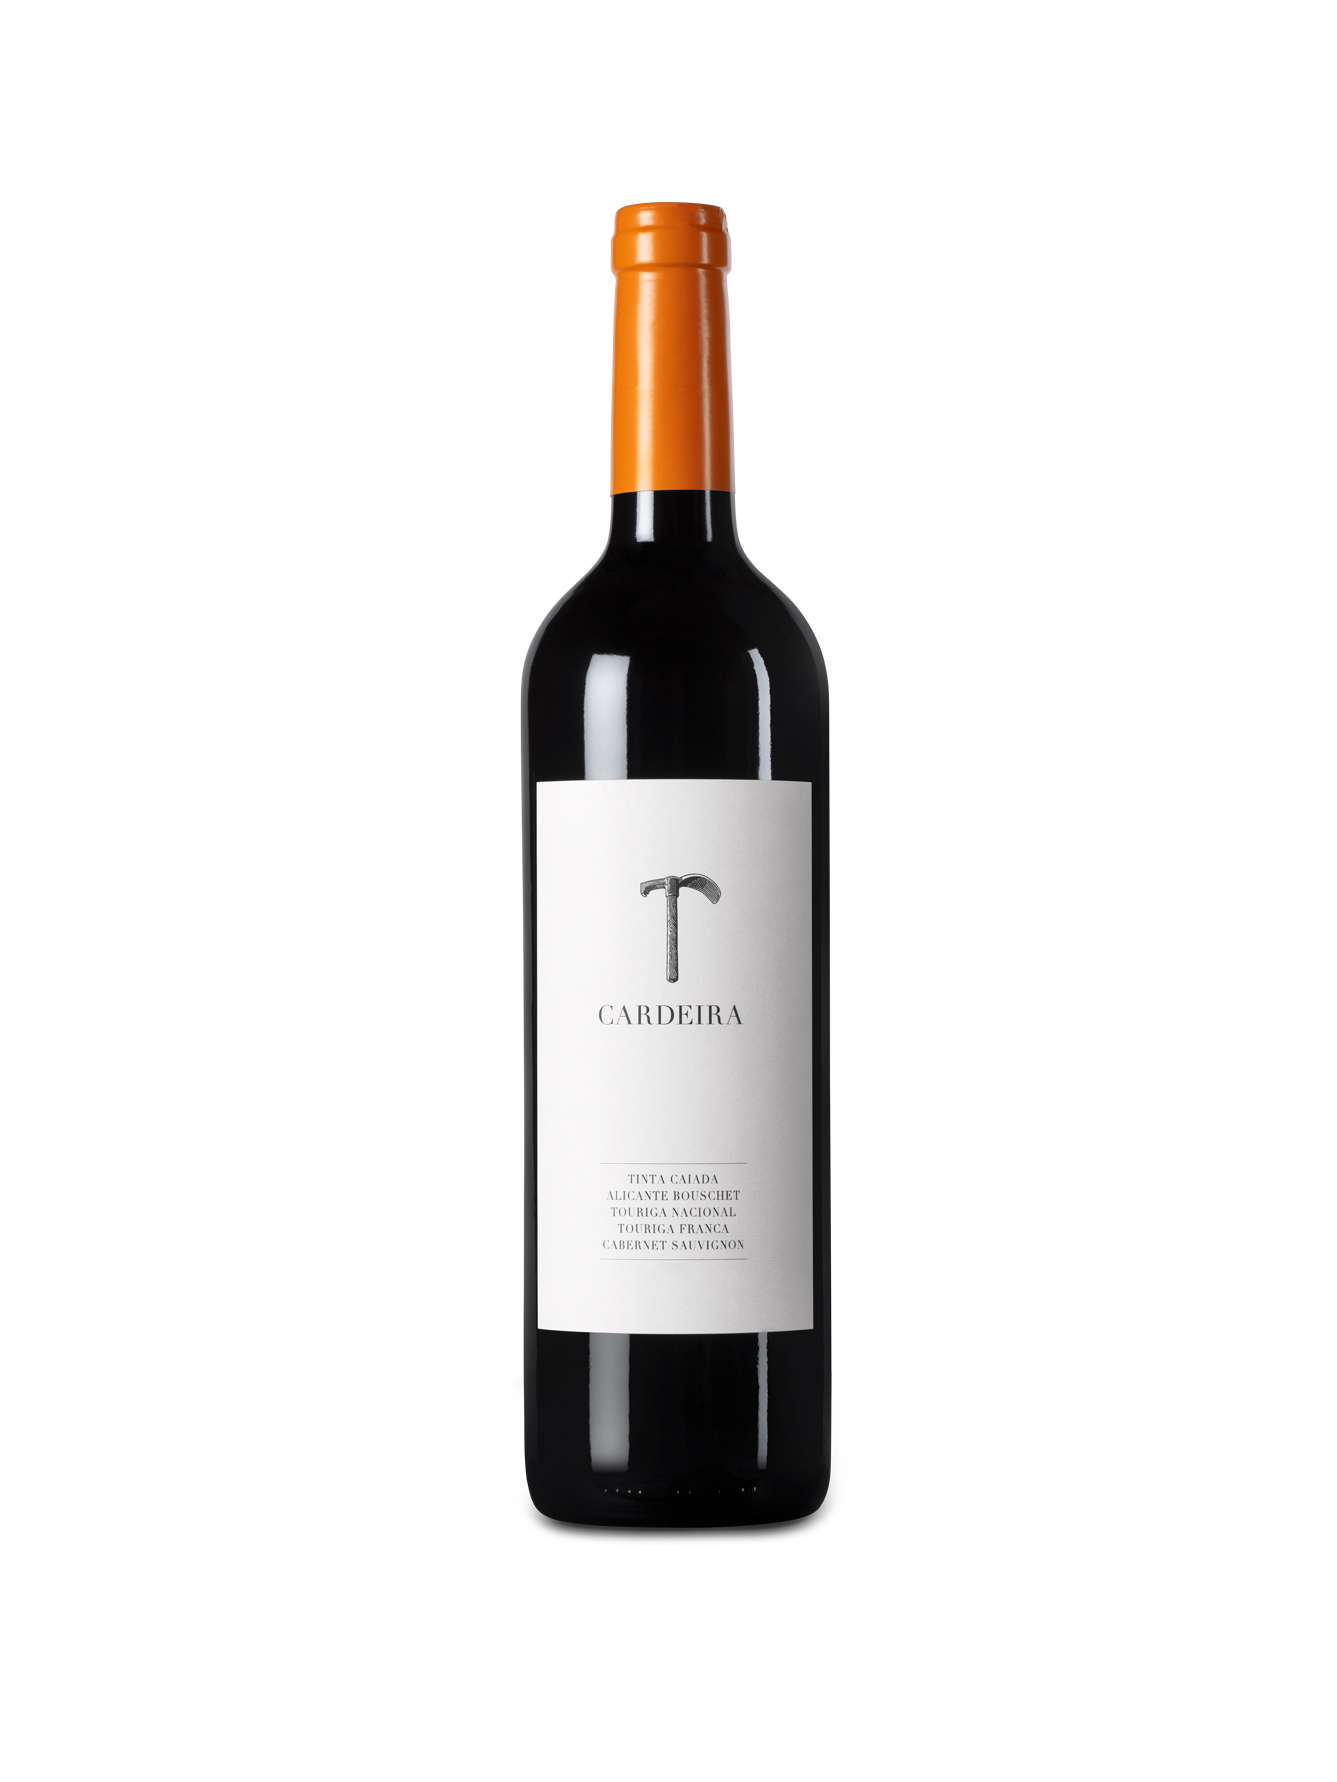 Cardeira tinto. Let’s have a toast on a big wine.